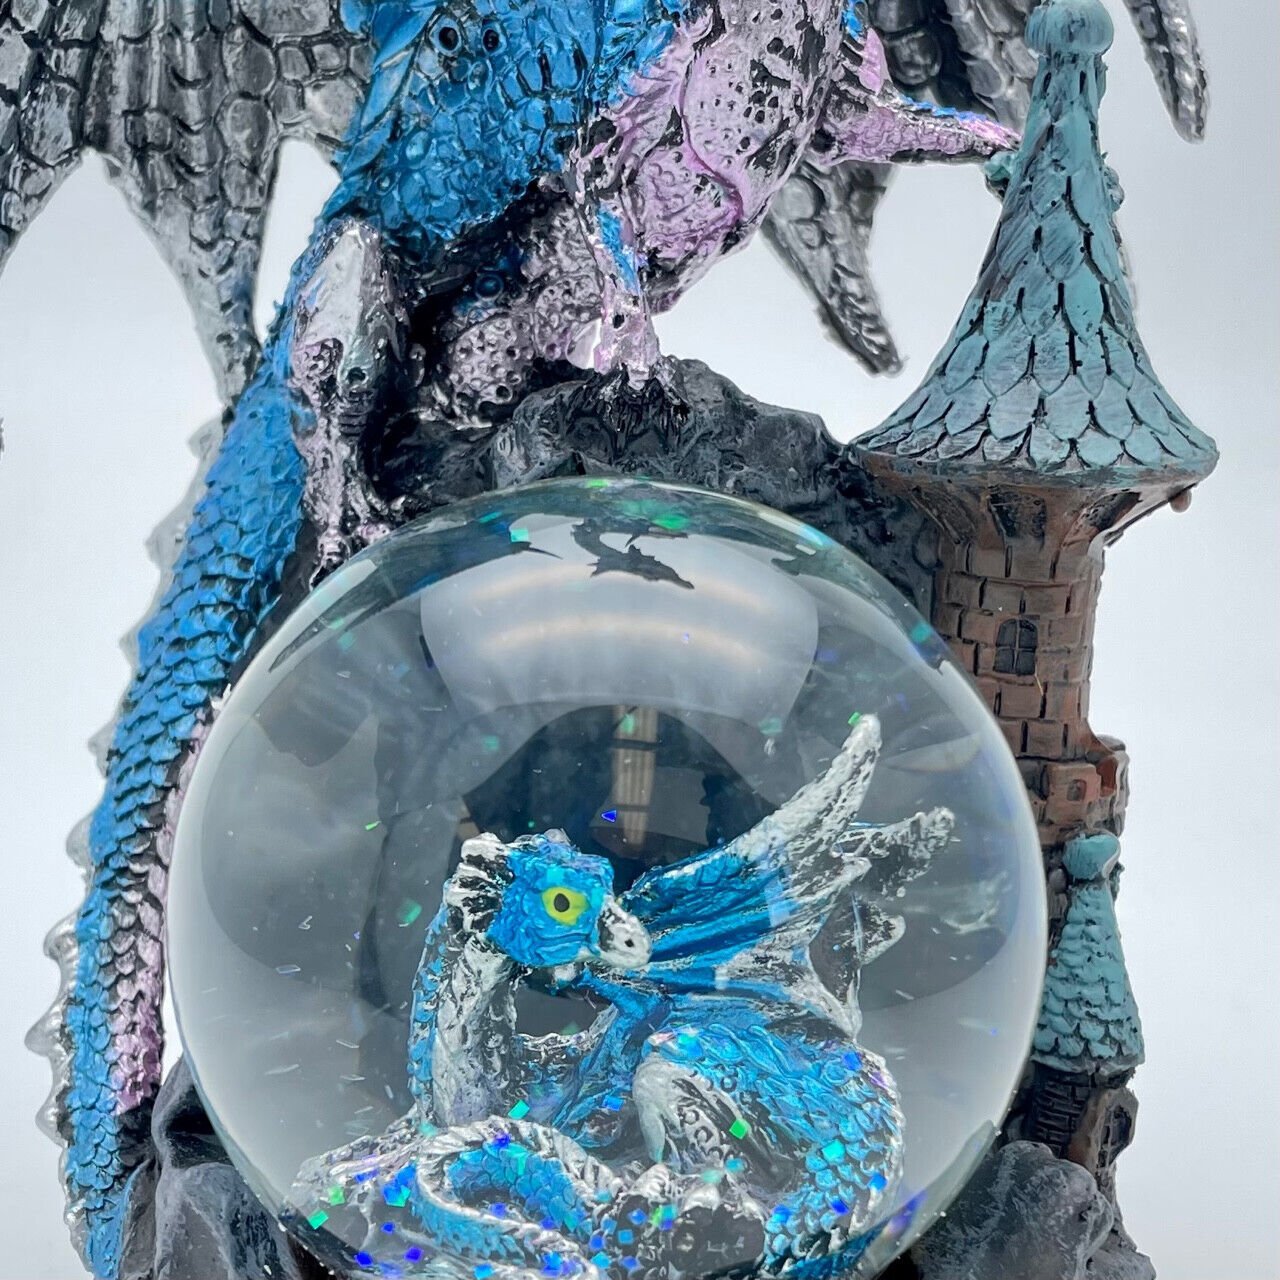 Blue Dragon With Waterball & Baby Dragon Figurine